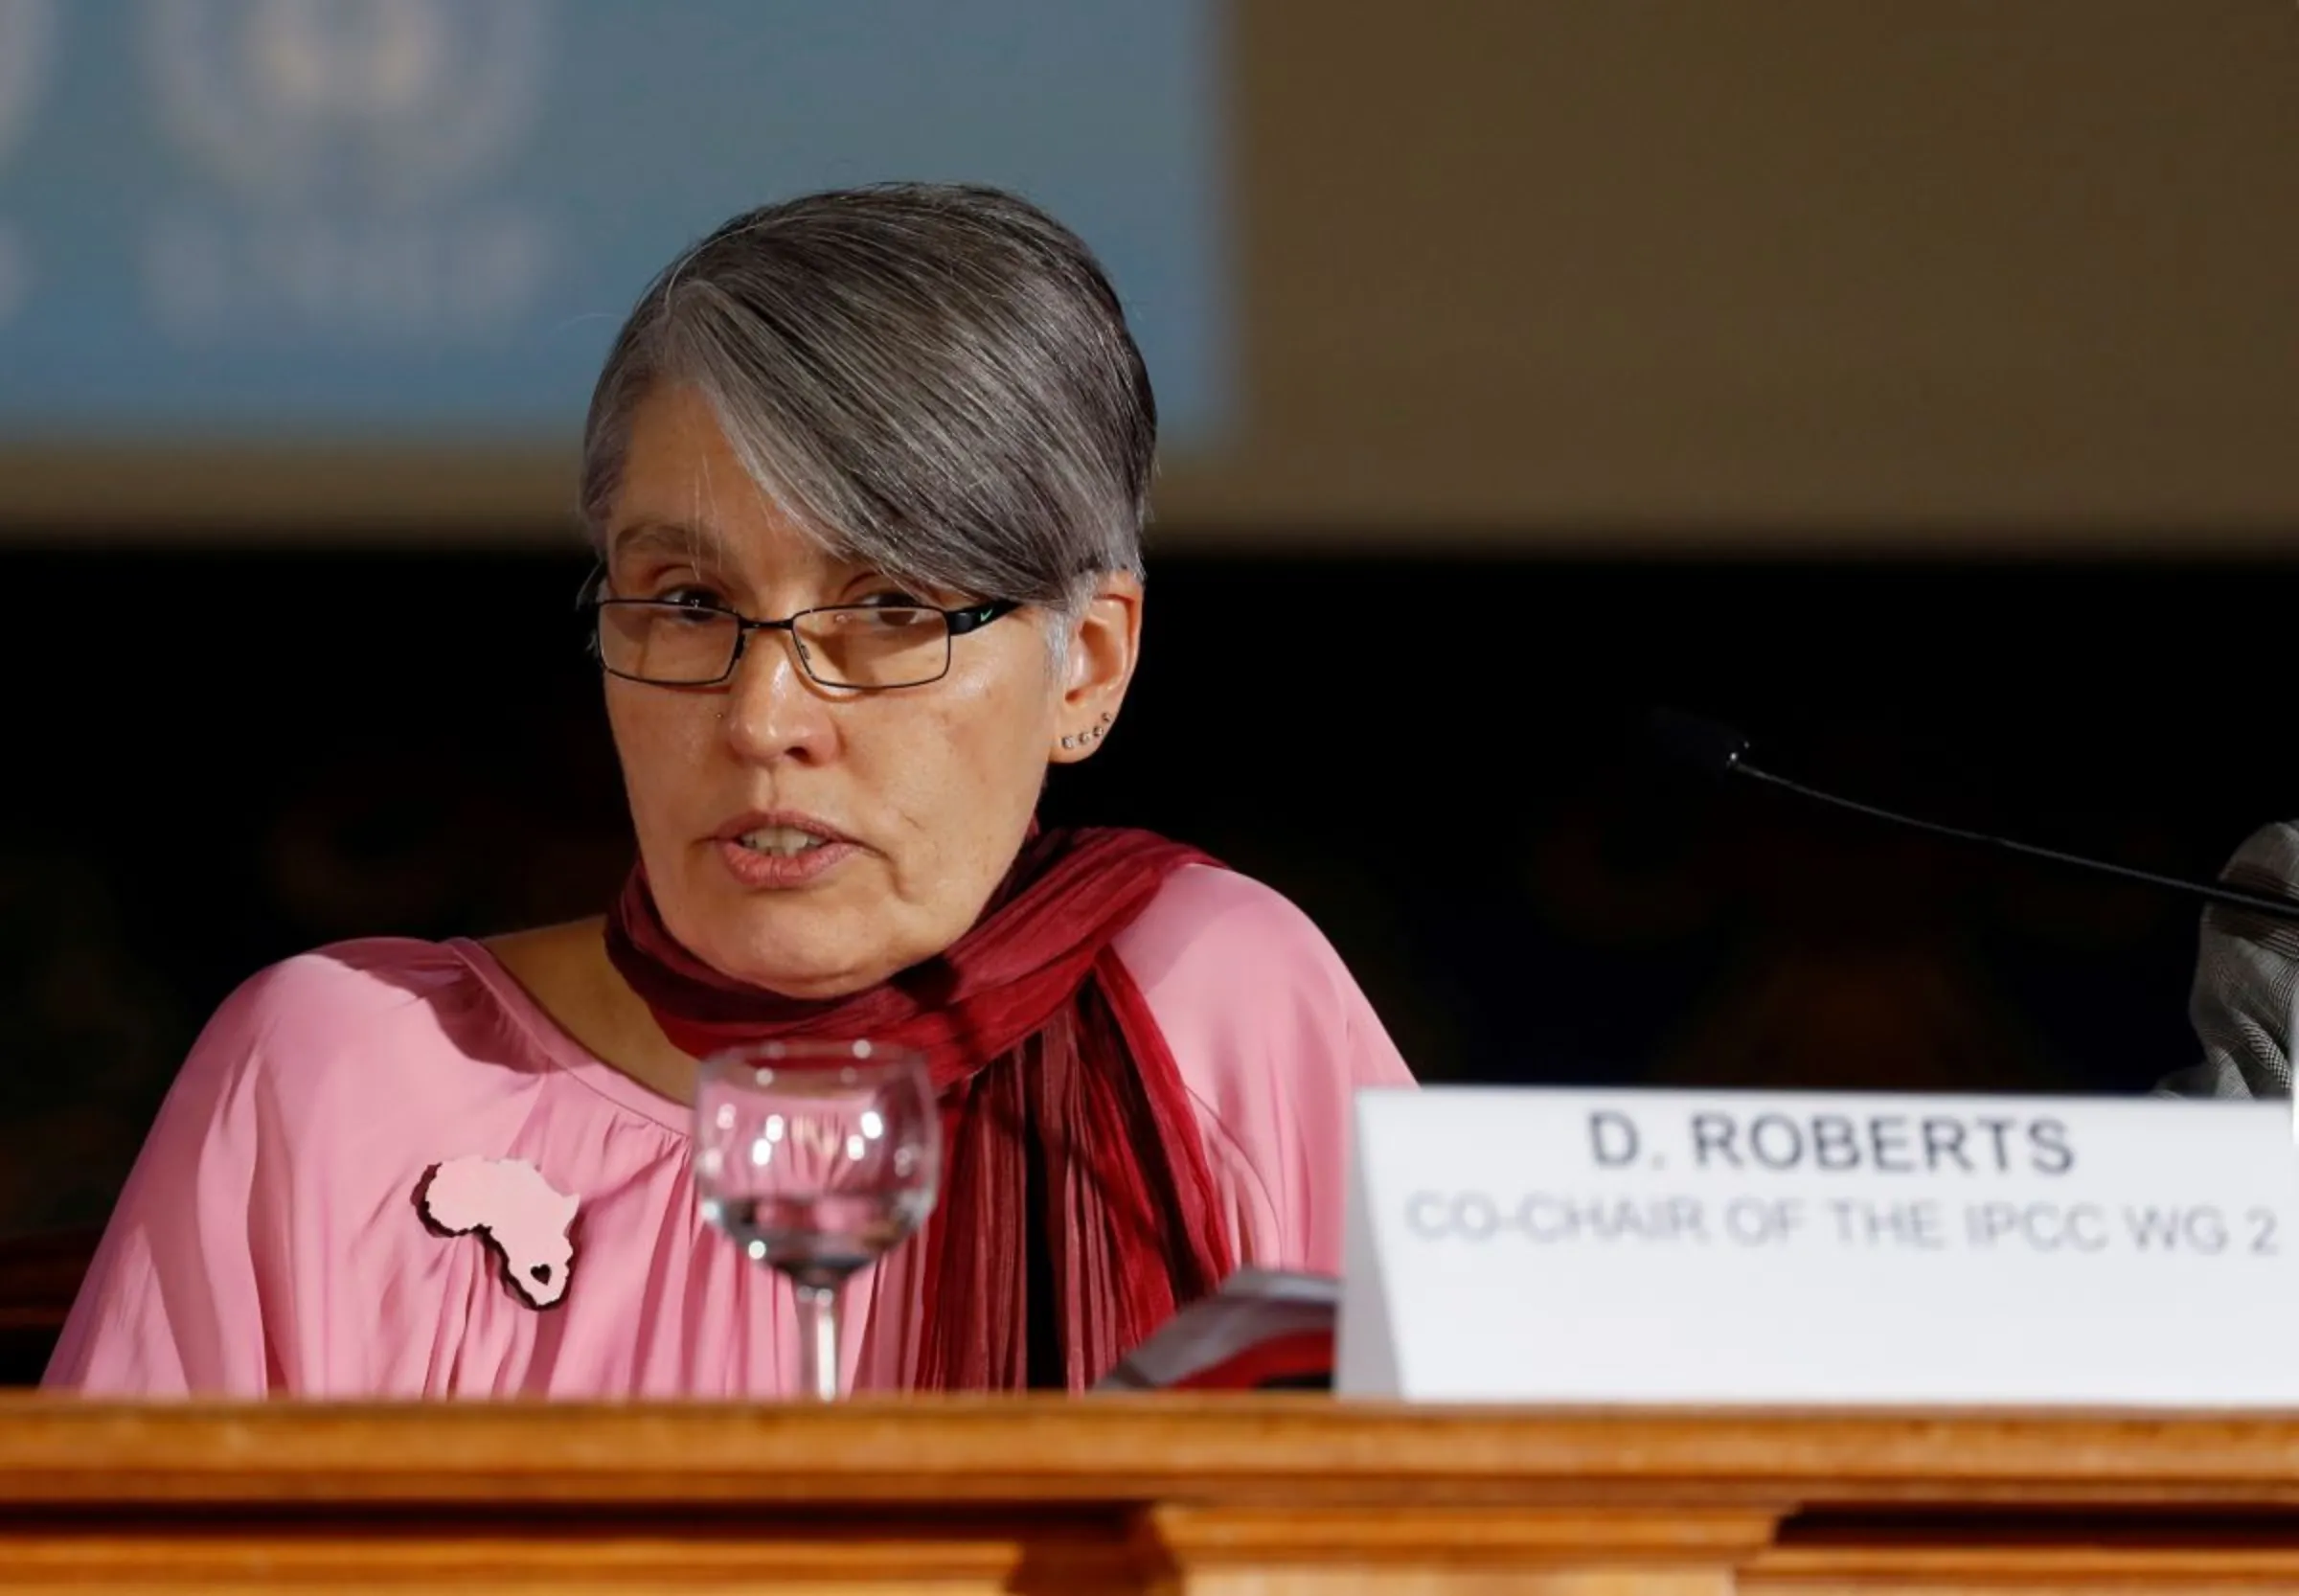 Co-chair of IPCC WG 2 Debra Roberts attends a news conference to present the special report on the Ocean and Cryosphere in a Changing Climate Context as part of the 51st Session of the Intergovernmental Panel on Climate Change (IPCC), in Monaco, September 25, 2019